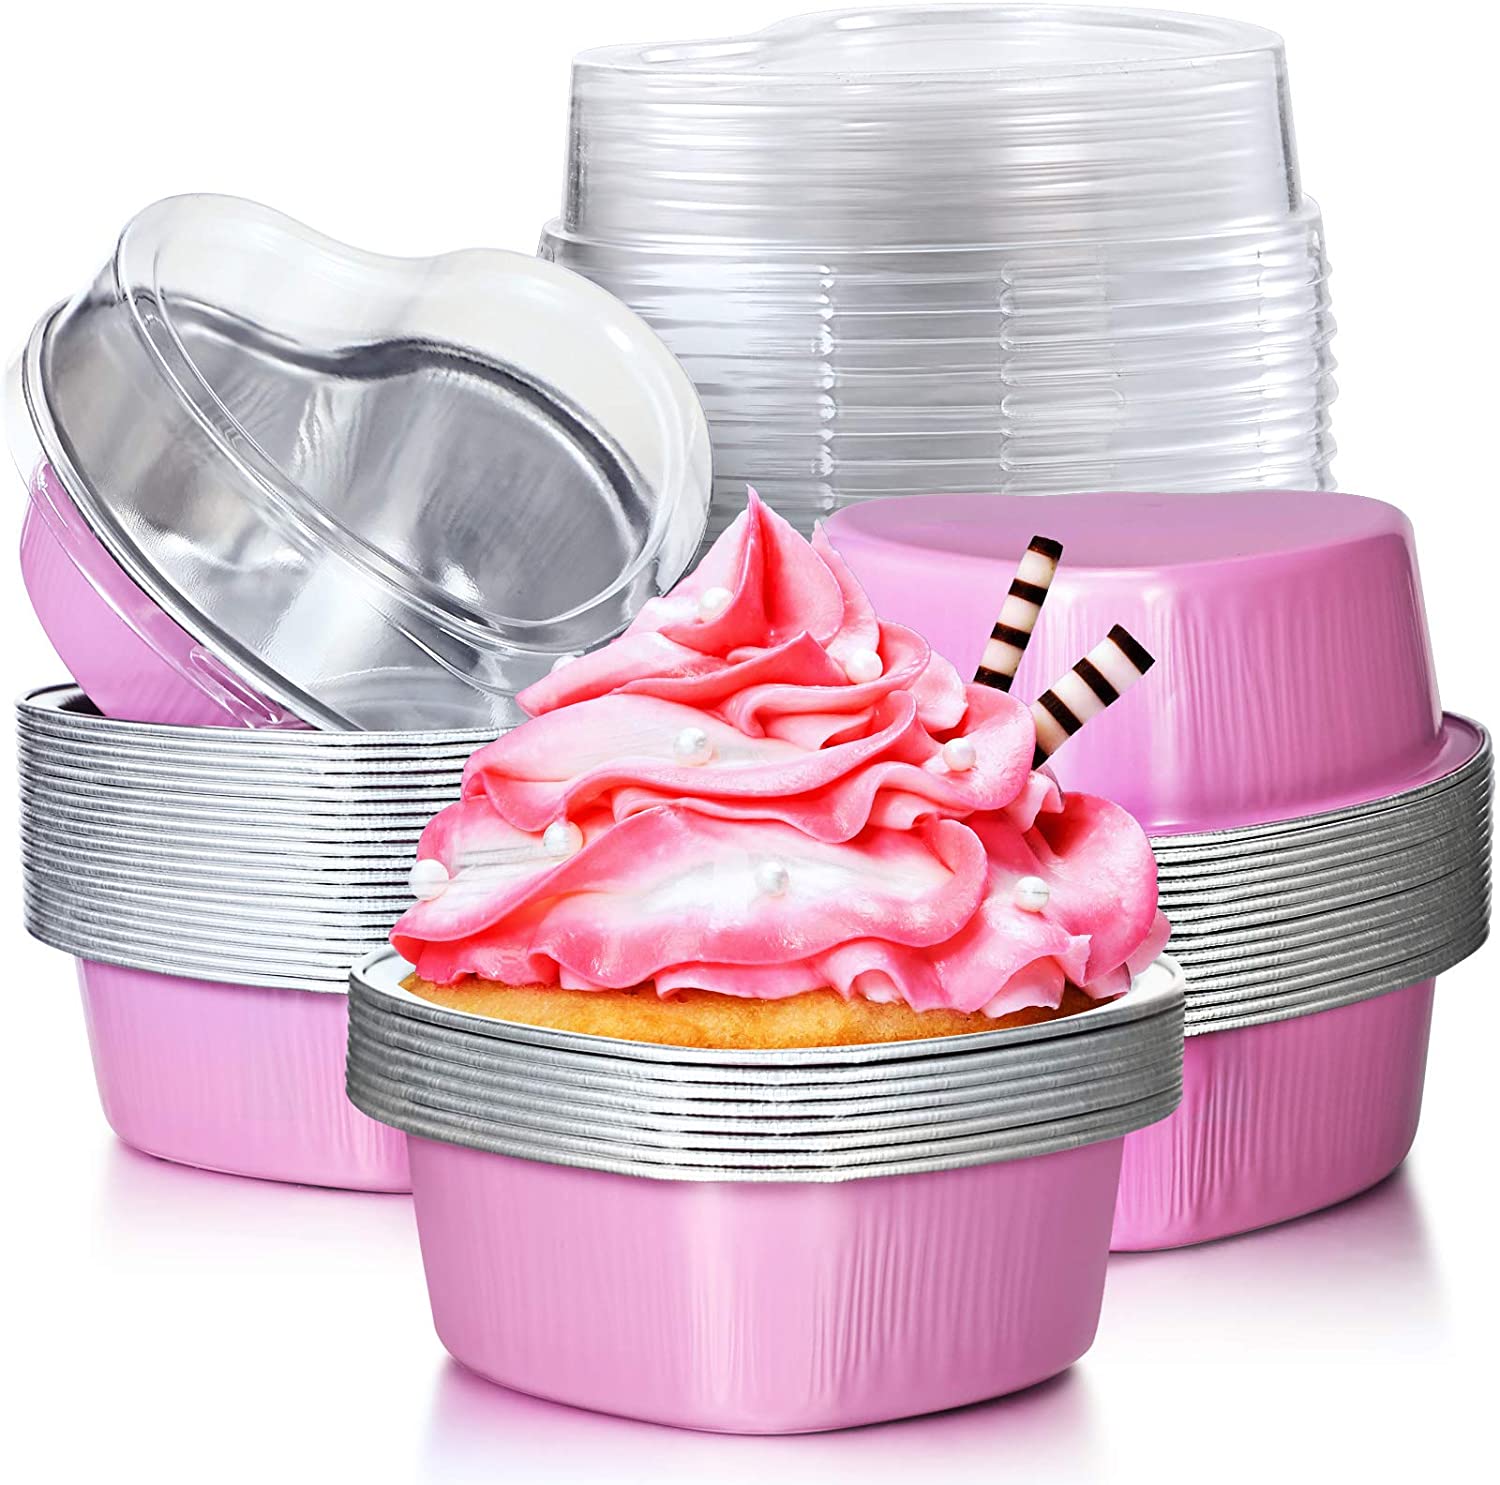 Aluminum Foil Cake Pan Heart Shaped Cupcake Cup with Lids 100 ml/ 3.4 Ounces Disposable Mini Cupcake Cup Flan Baking Cups for Va